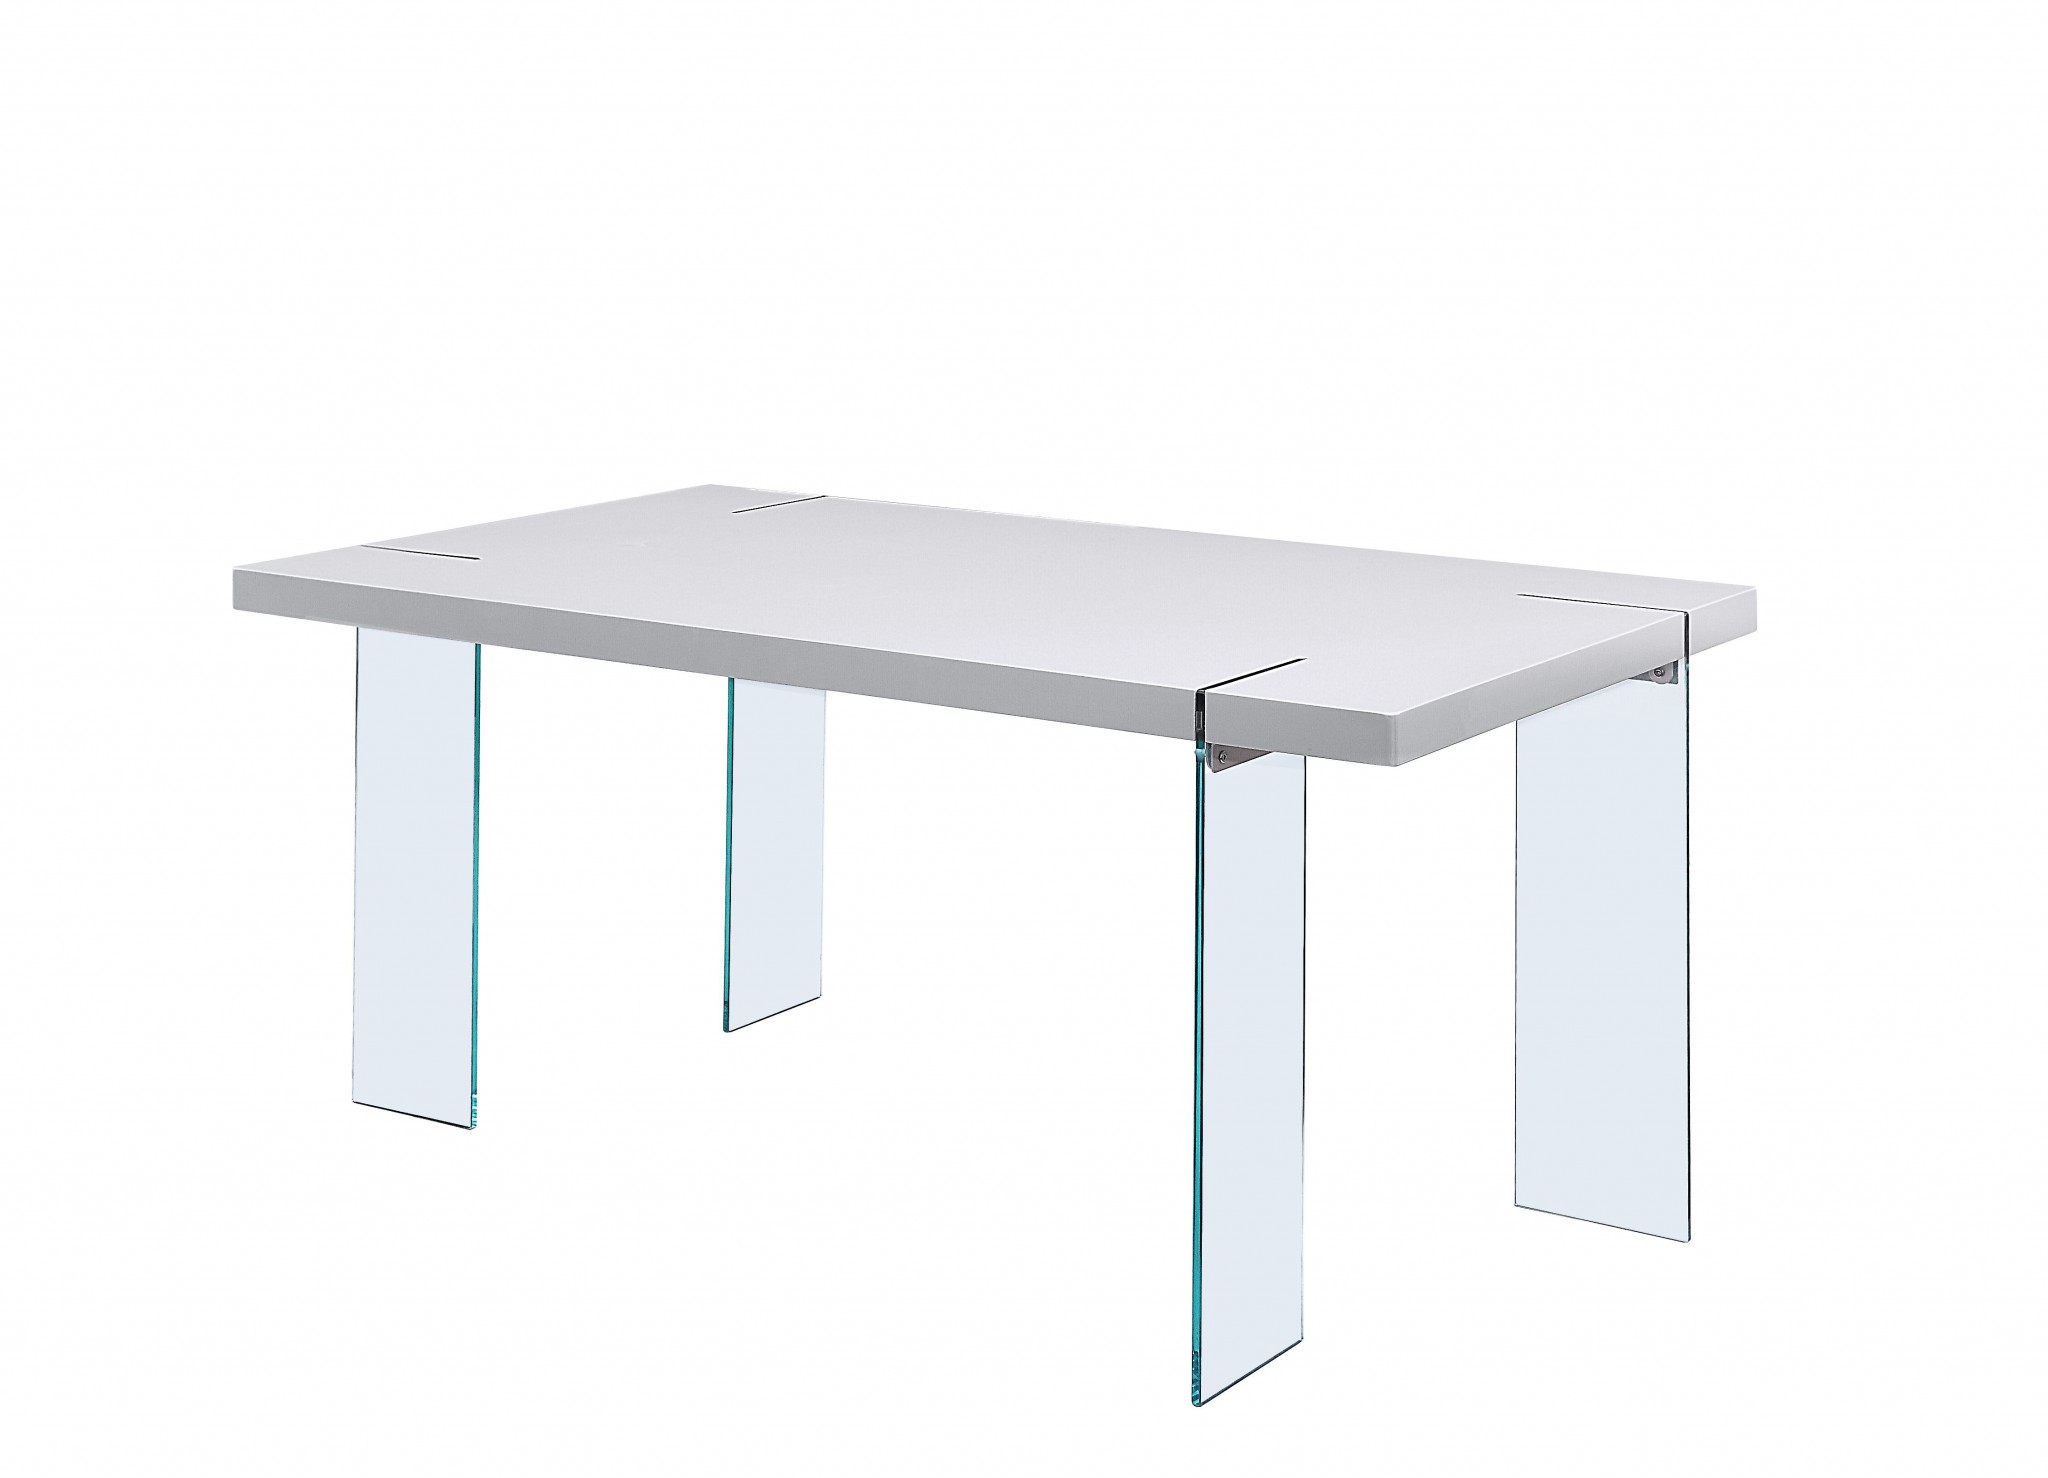 66" x 38" x 30" White High Gloss & Clear Glass Dining Table